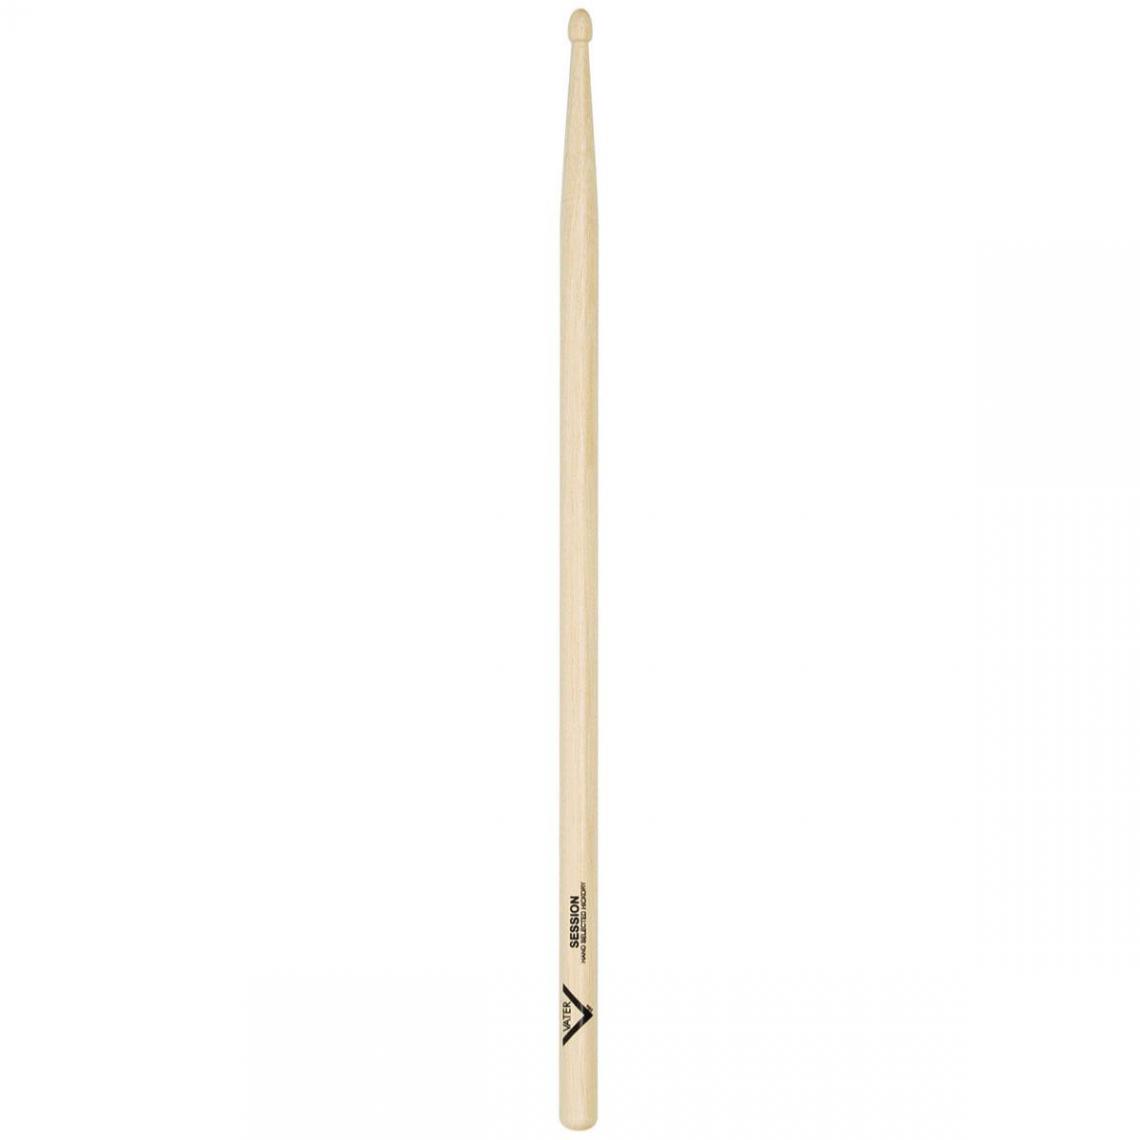 Vater - VATER VHSEW - Baguette vater hickory session - Accessoires percussions